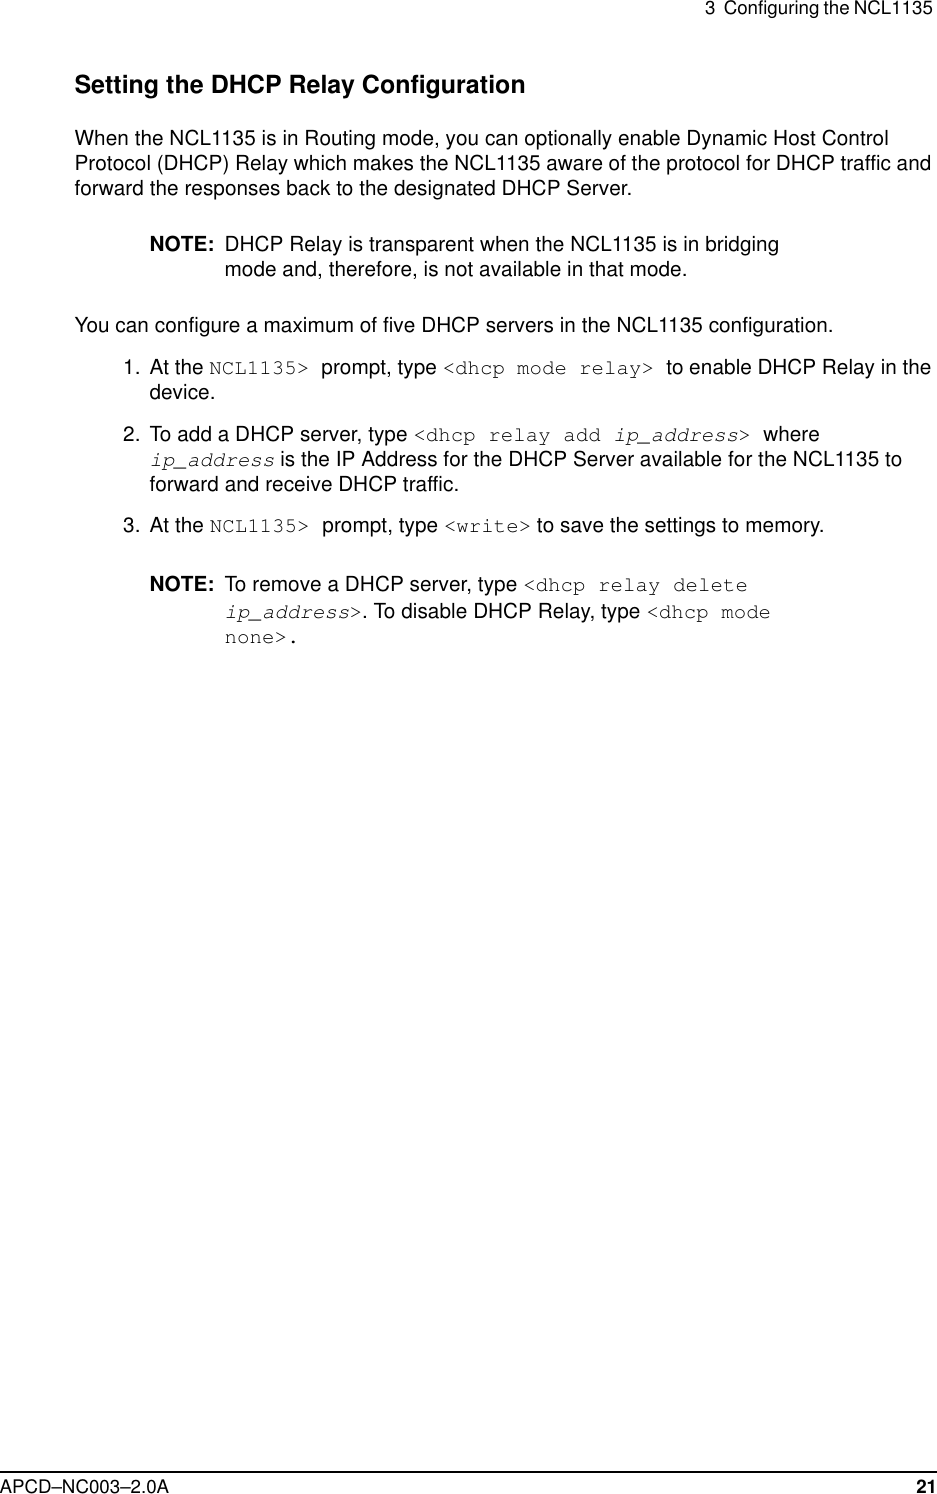 3  Configuring the NCL1135 APCD–NC003–2.0A 21Setting the DHCP Relay ConfigurationWhen the NCL1135 is in Routing mode, you can optionally enable Dynamic Host Control Protocol (DHCP) Relay which makes the NCL1135 aware of the protocol for DHCP traffic and forward the responses back to the designated DHCP Server. NOTE: DHCP Relay is transparent when the NCL1135 is in bridging mode and, therefore, is not available in that mode.You can configure a maximum of five DHCP servers in the NCL1135 configuration. 1. At the NCL1135&gt; prompt, type &lt;dhcp mode relay&gt; to enable DHCP Relay in the device.  2. To add a DHCP server, type &lt;dhcp relay add ip_address&gt; where ip_address is the IP Address for the DHCP Server available for the NCL1135 to forward and receive DHCP traffic. 3. At the NCL1135&gt; prompt, type &lt;write&gt; to save the settings to memory.NOTE: To remove a DHCP server, type &lt;dhcp relay delete ip_address&gt;. To disable DHCP Relay, type &lt;dhcp mode none&gt;.